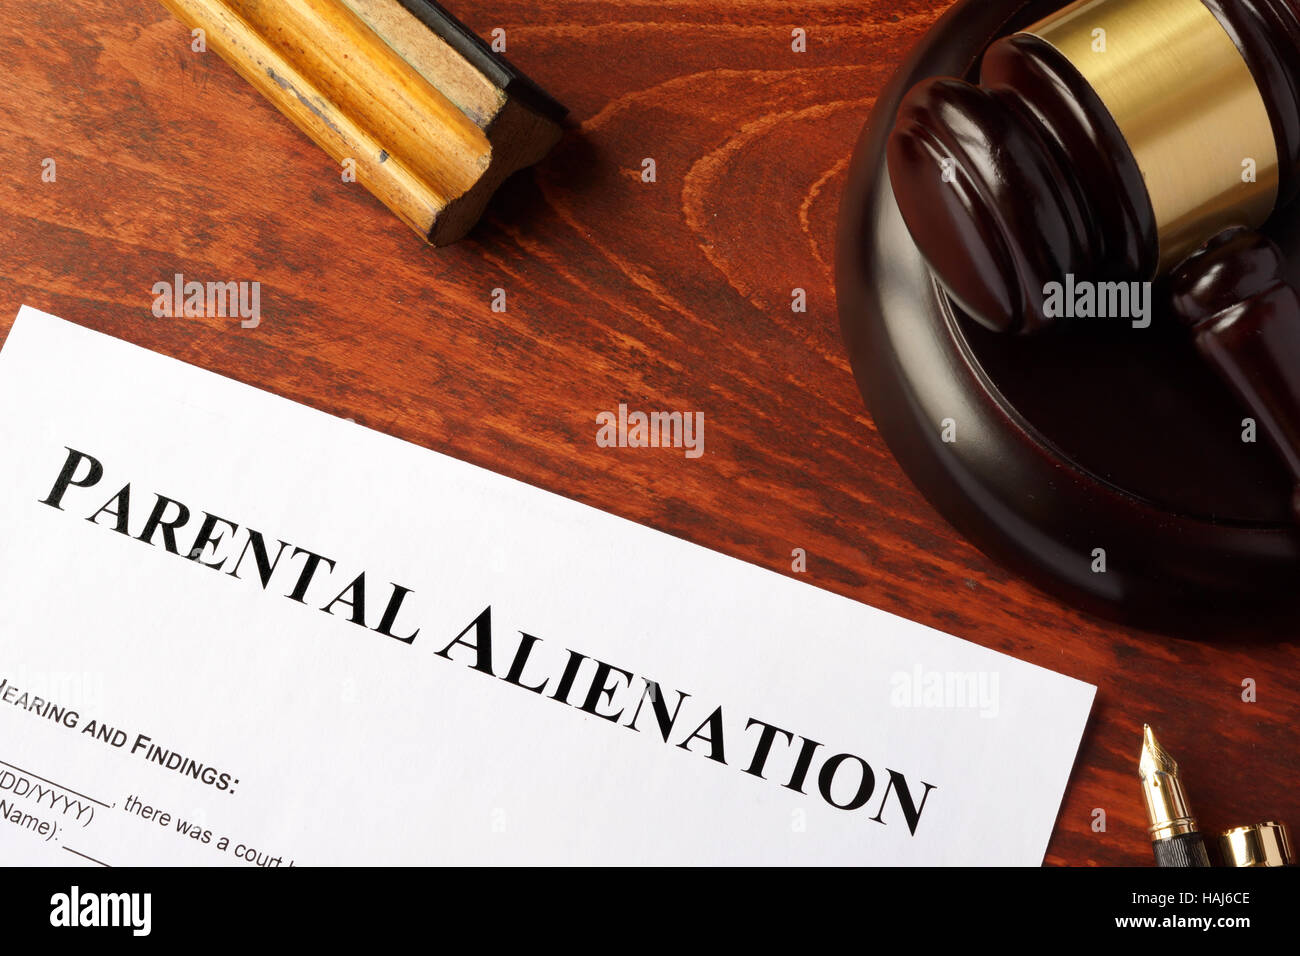 Parental alienation form and gavel on a table. Stock Photo